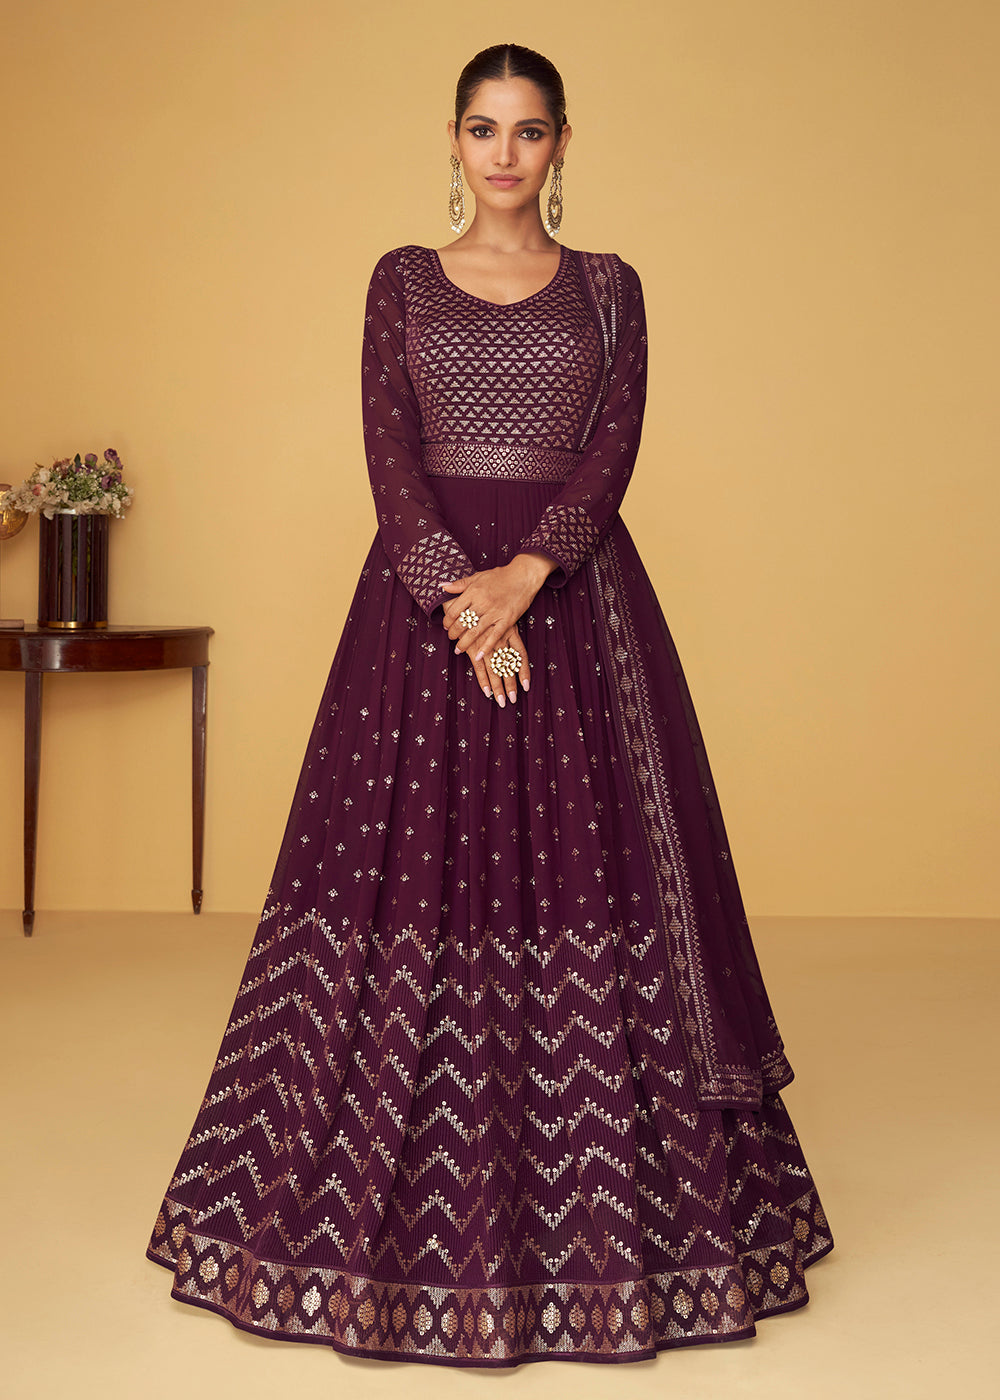 Buy Now Sequins & Thread Real Georgette Purple Indian Anarkali Suit Online in USA, UK, Australia, New Zealand, Canada & Worldwide at Empress Clothing. 